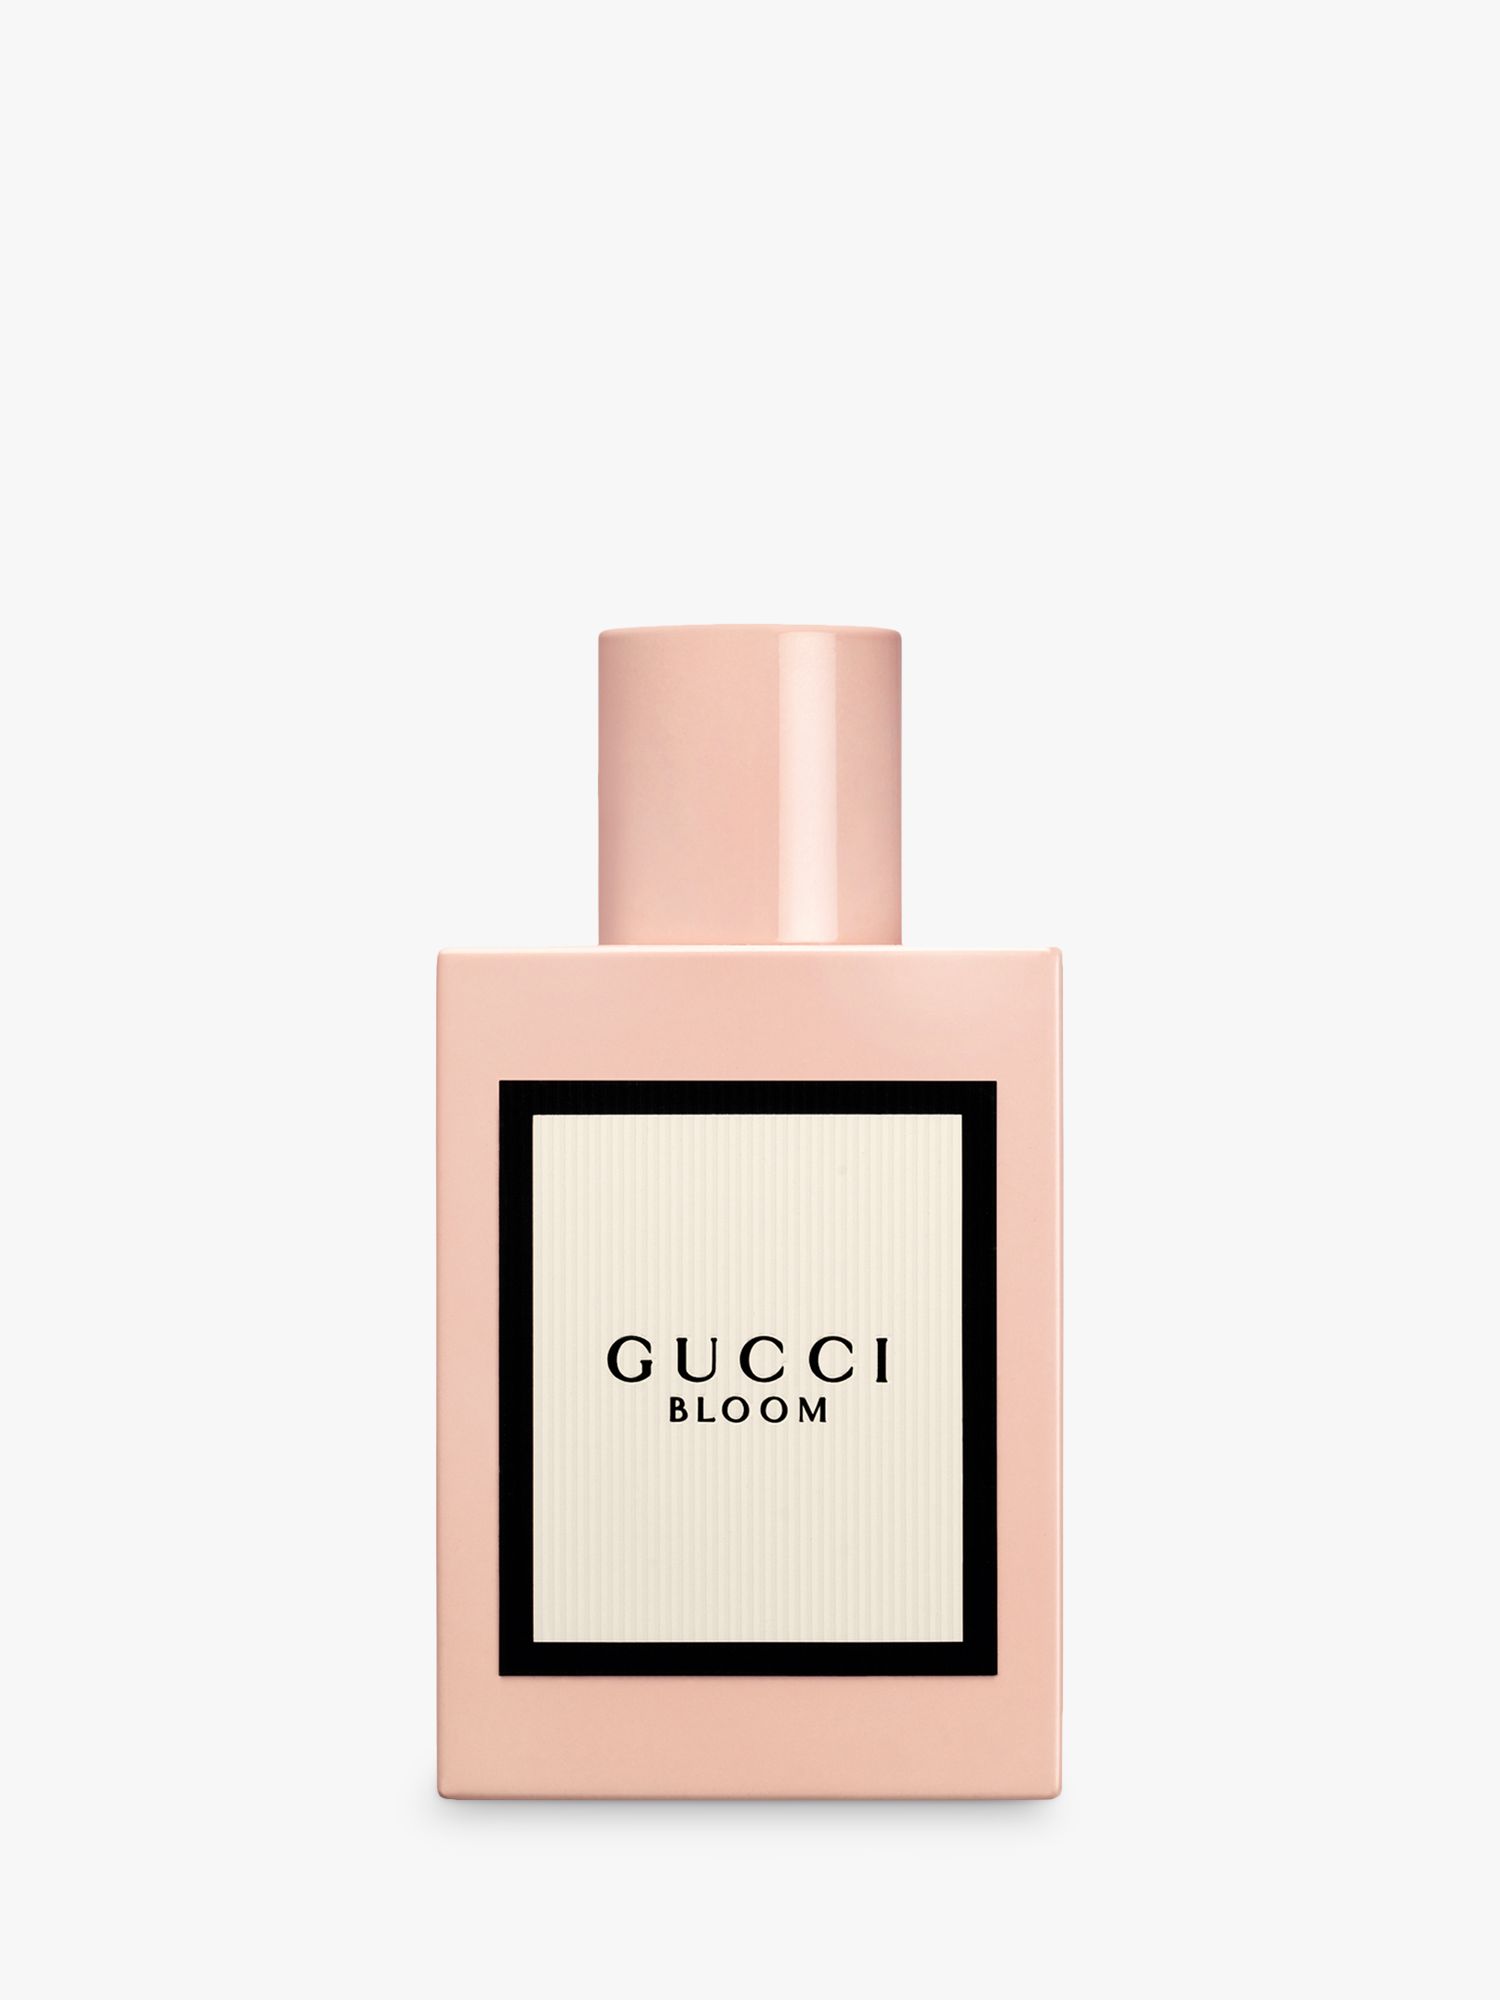 gucci guilty 30ml boots